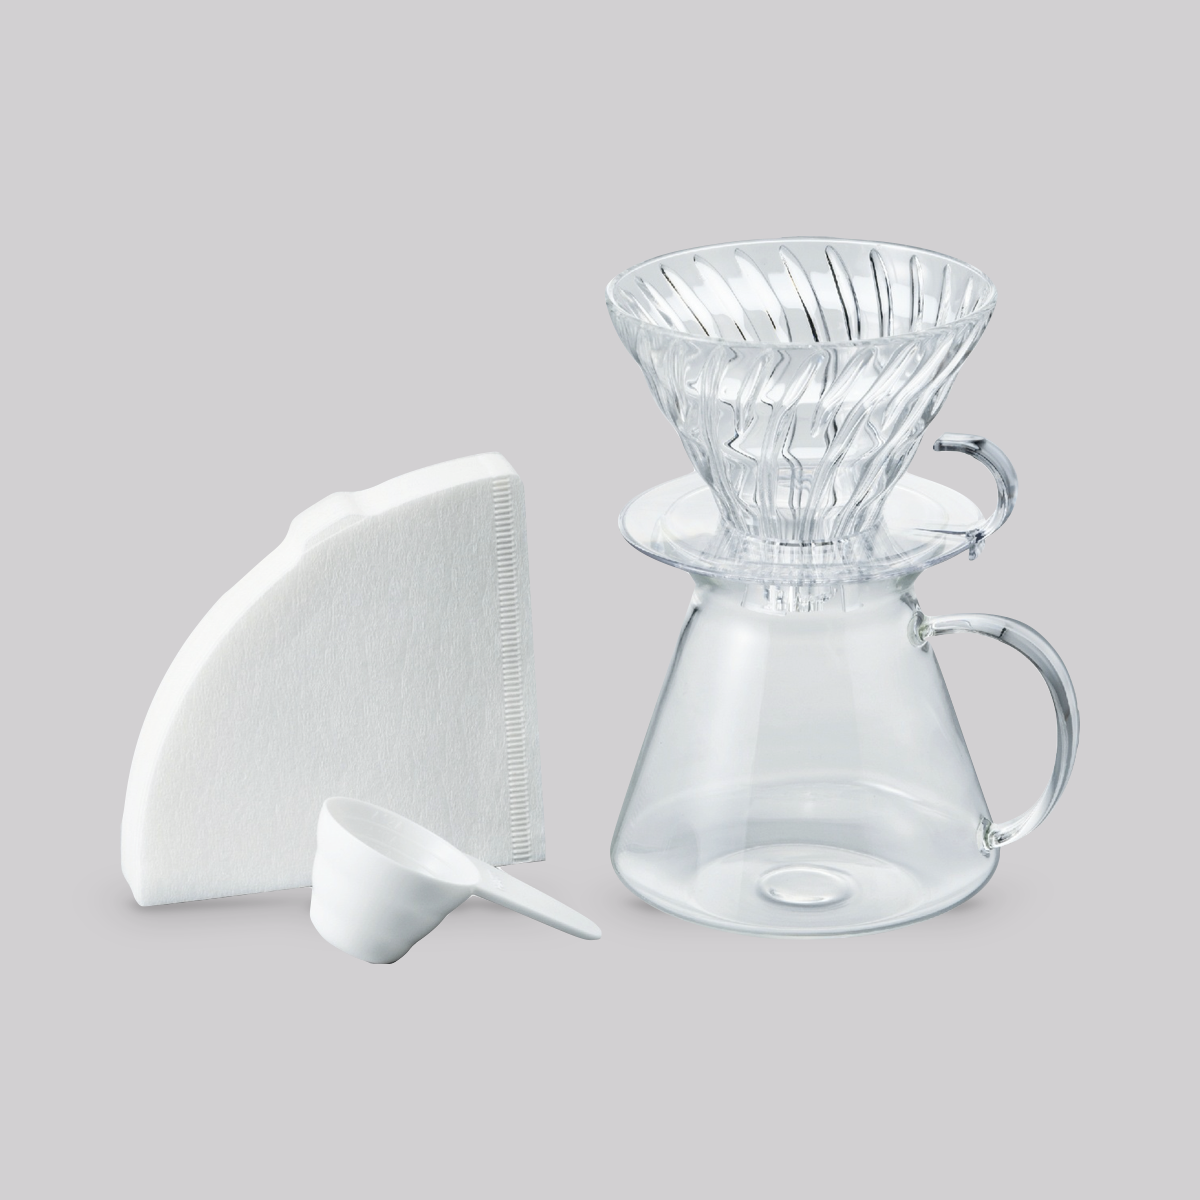 [In Stock｜Free Shipping in Hong Kong] Hario - V60 02 Glass Coffee Maker Set (1-4 cups)｜With 40 bleach filters｜Glass Dripper Set S-VGBK-02-T｜Simply Hario